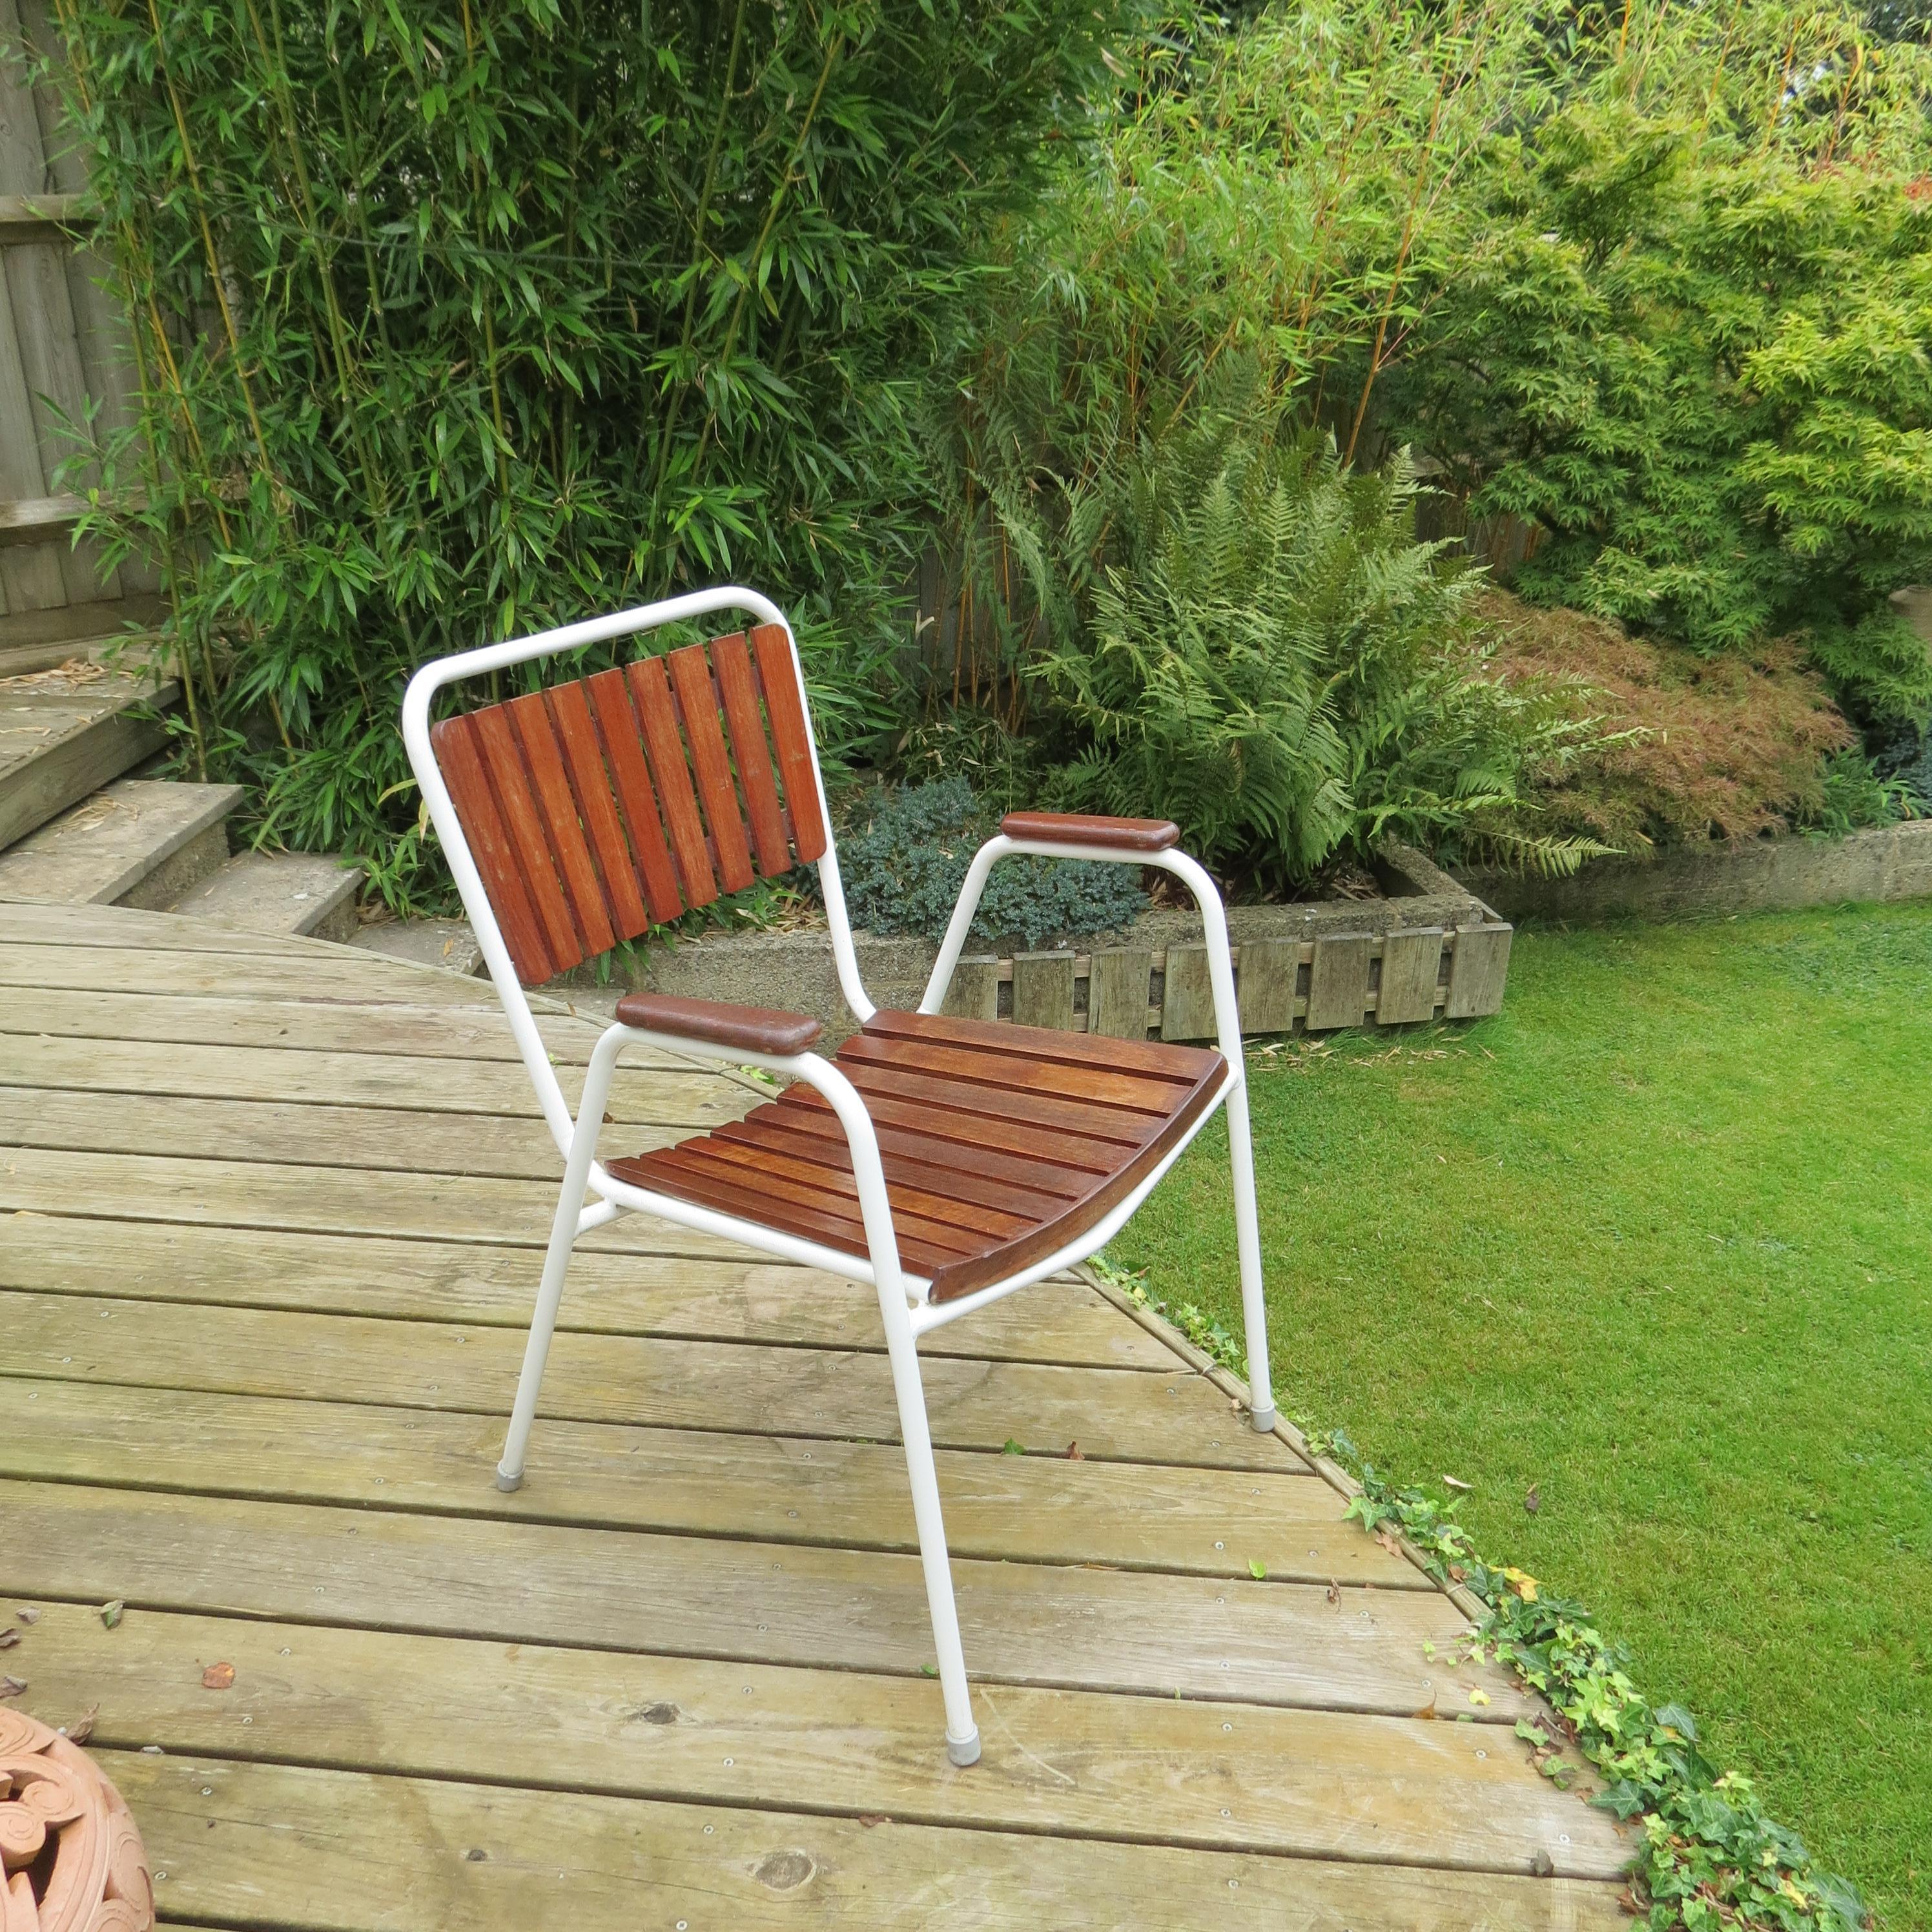 Wonderful garden chair. Designed and produced by Daneline, Denmark. 

Plastic coated steel tube frames with solid Teak slatted seat and backs. 

Dating from the 1960s, in good condition, with minimal signs of wear, it retains the original white